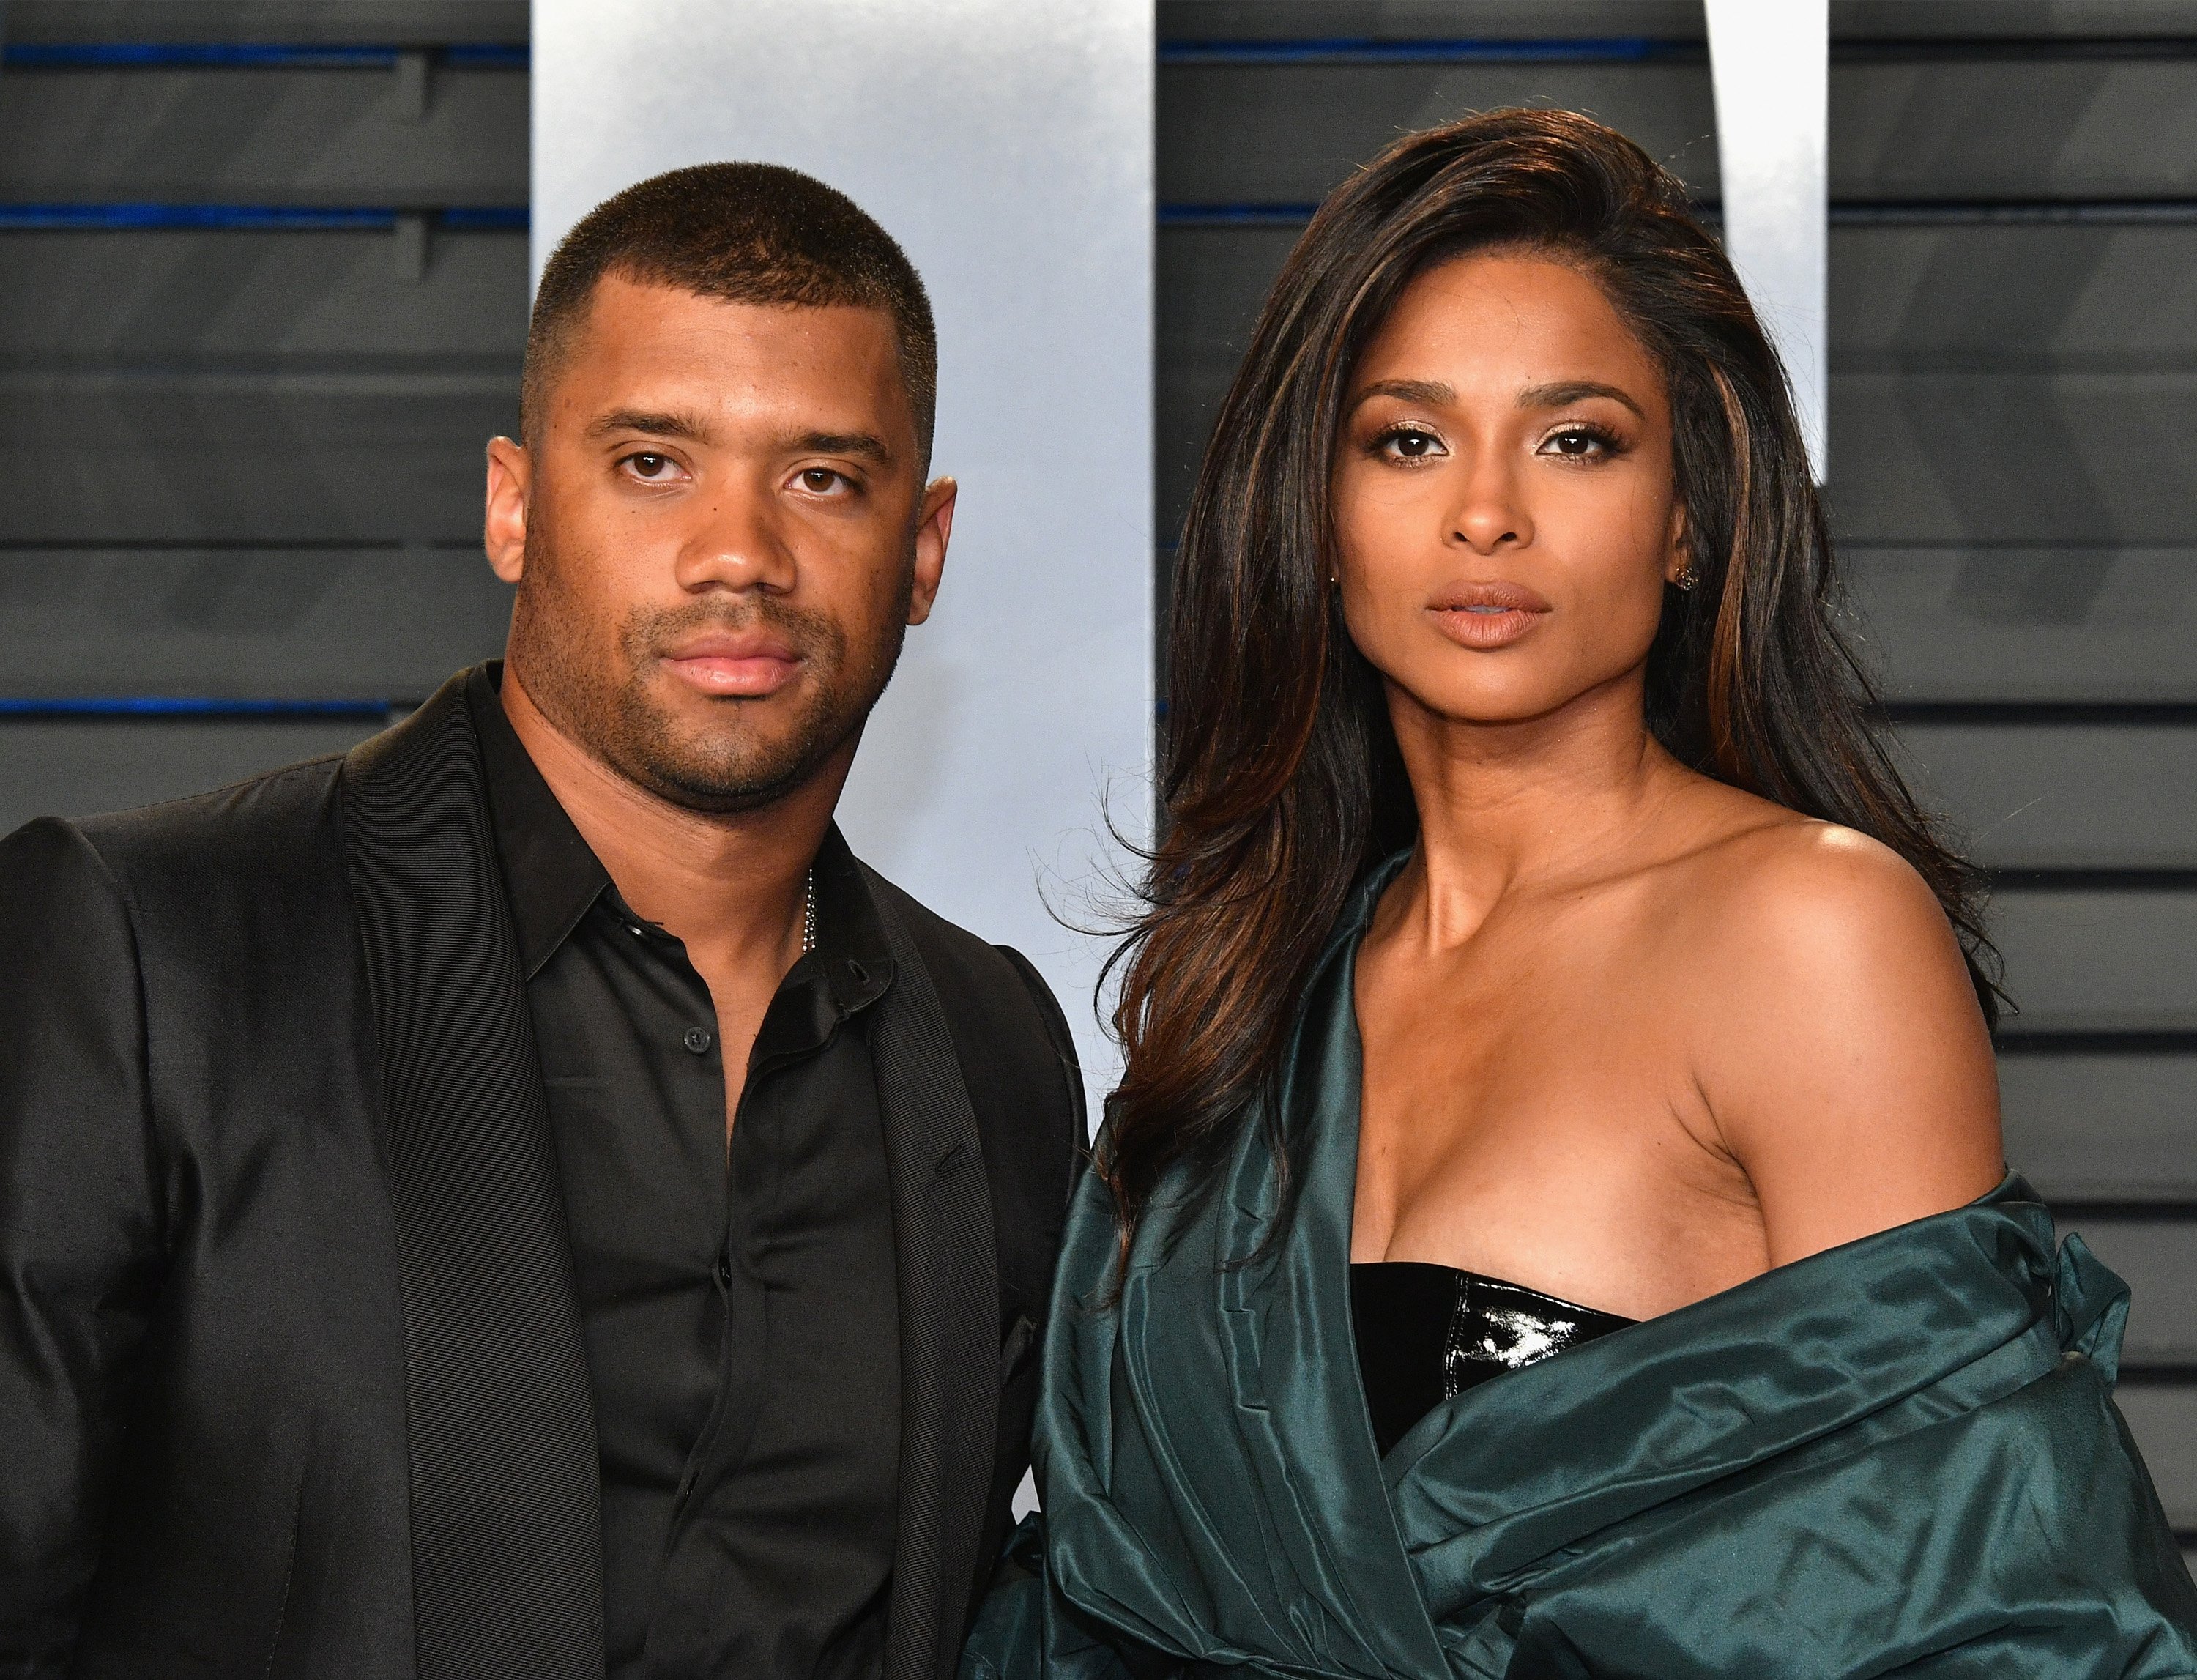 Russell Wilson and Ciara attend the 2018 Vanity Fair Oscar Party on March 4, 2018 in Beverly Hills, California. | Source: Getty Images